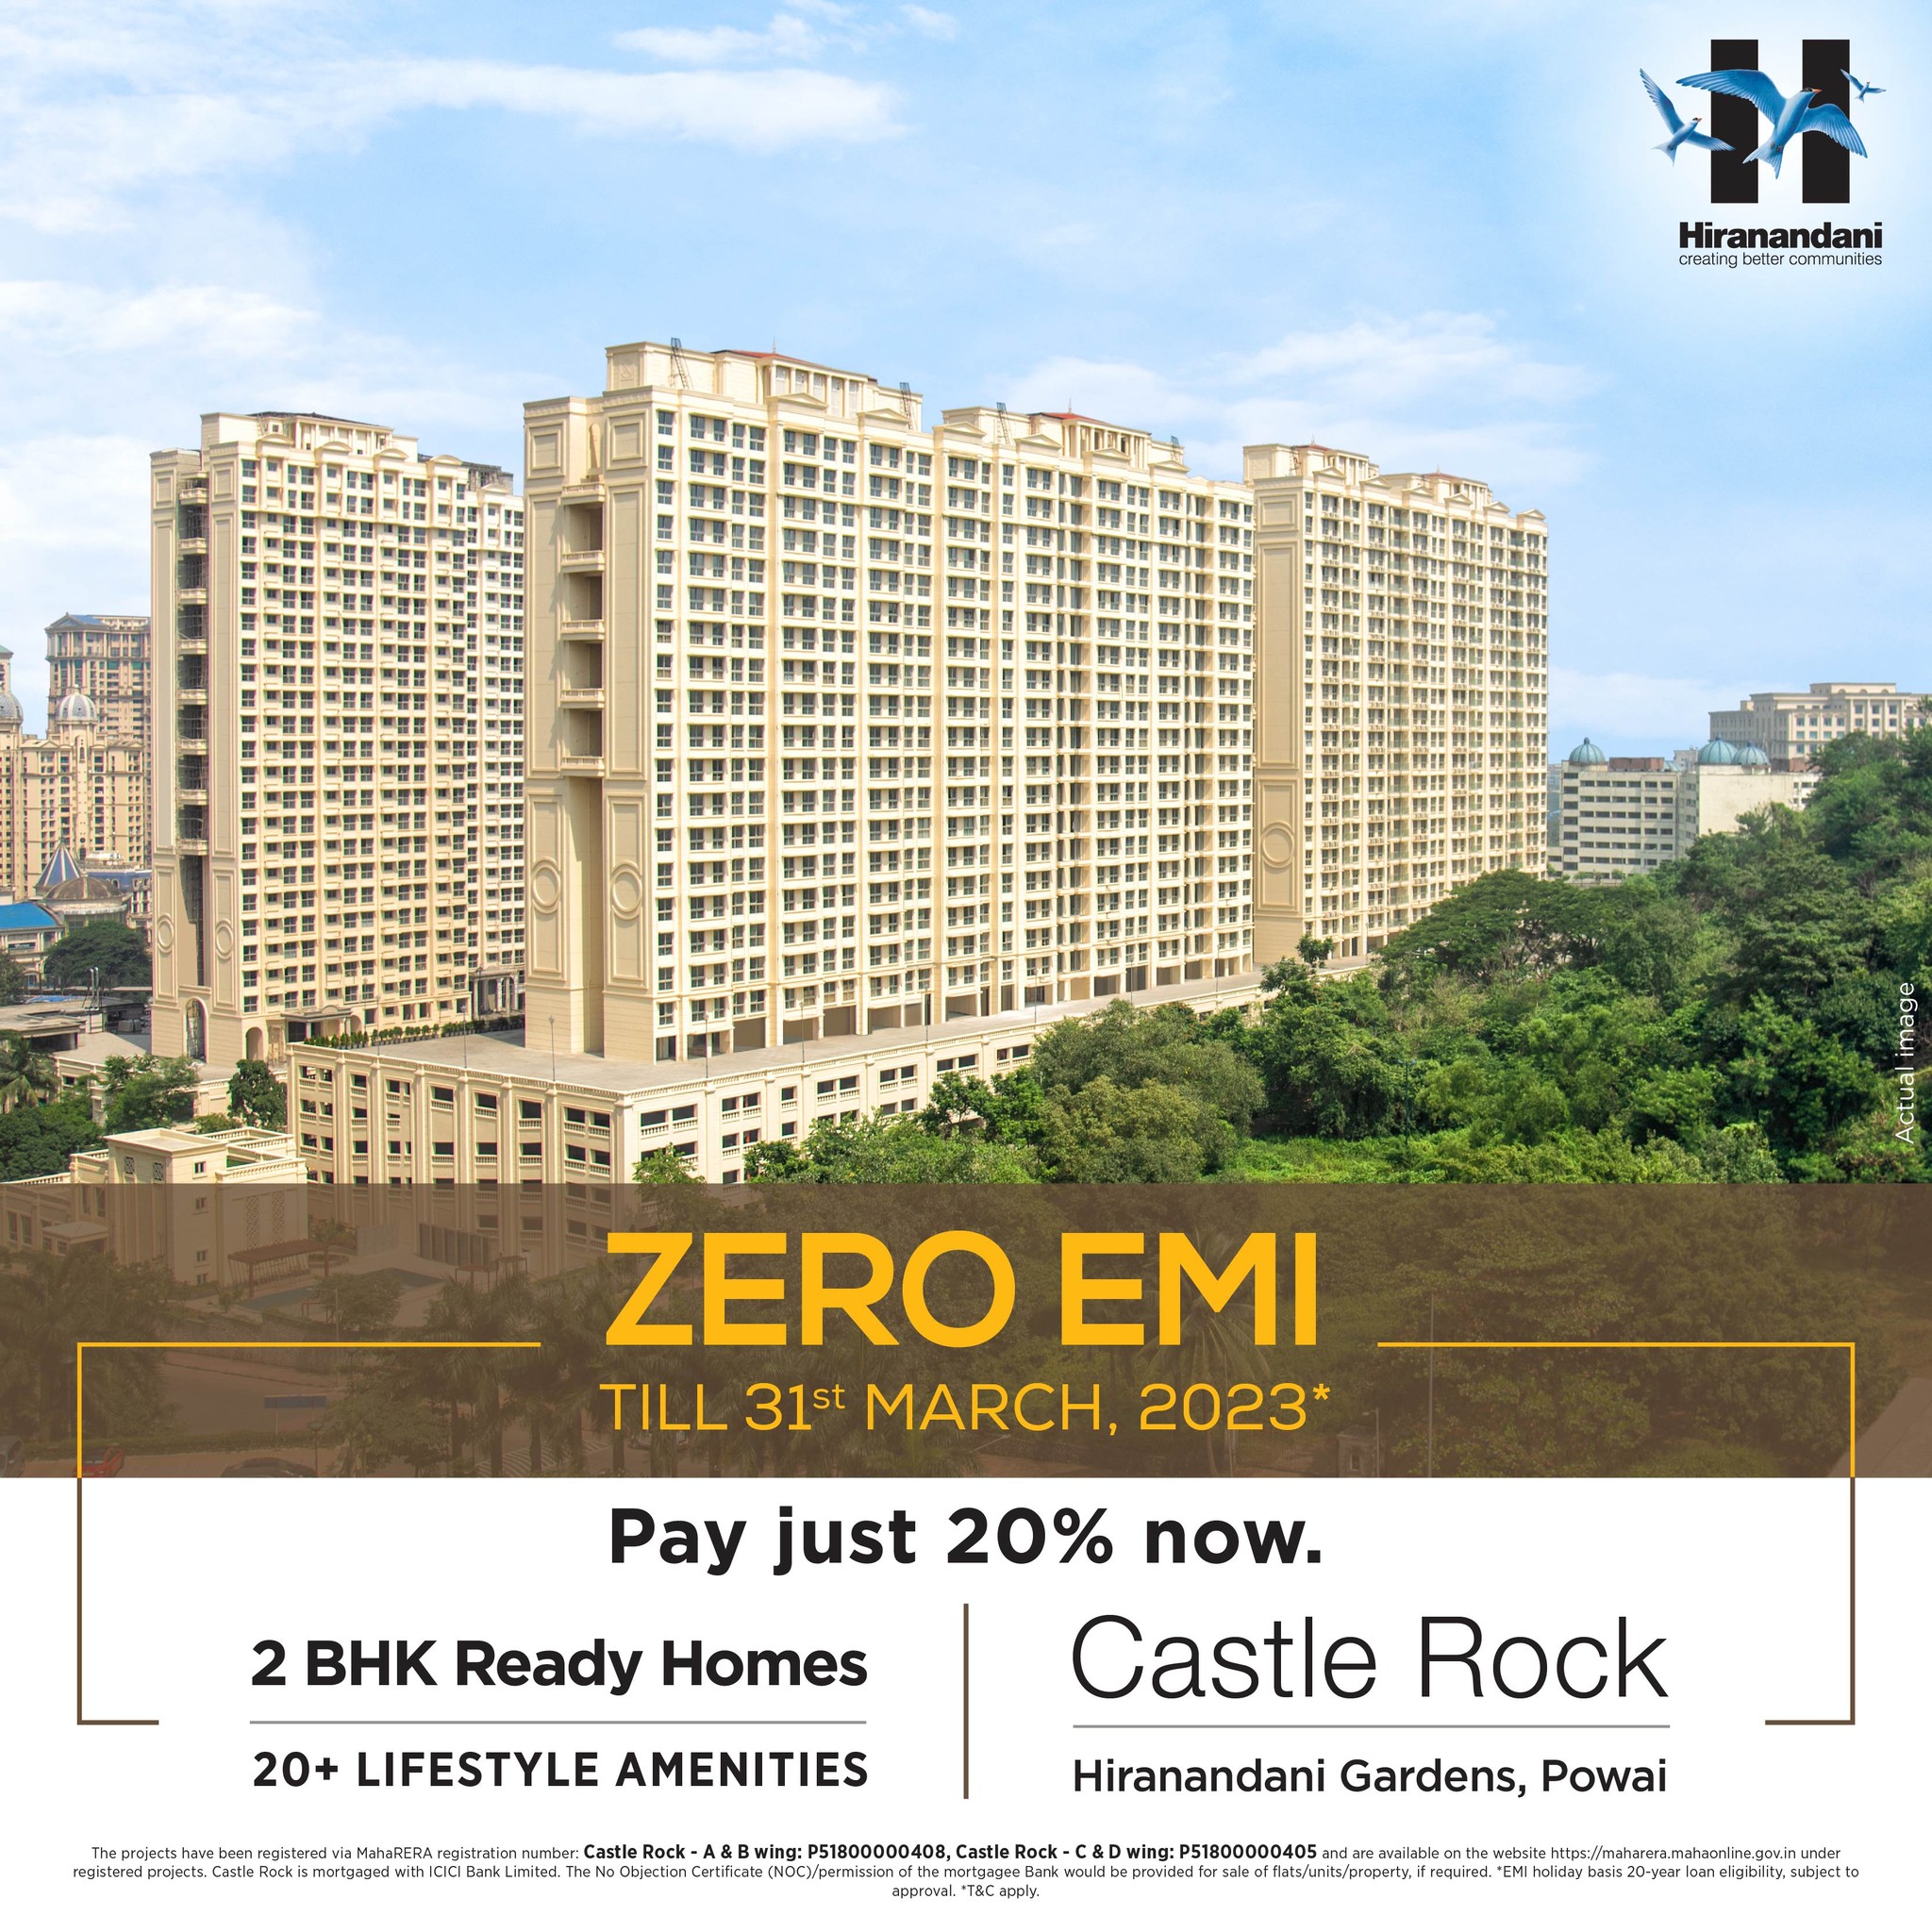 Pay just 20% now and 2 BHK ready homes at Hiranandani Castle Rock in Powai, JVLR, Mumbai